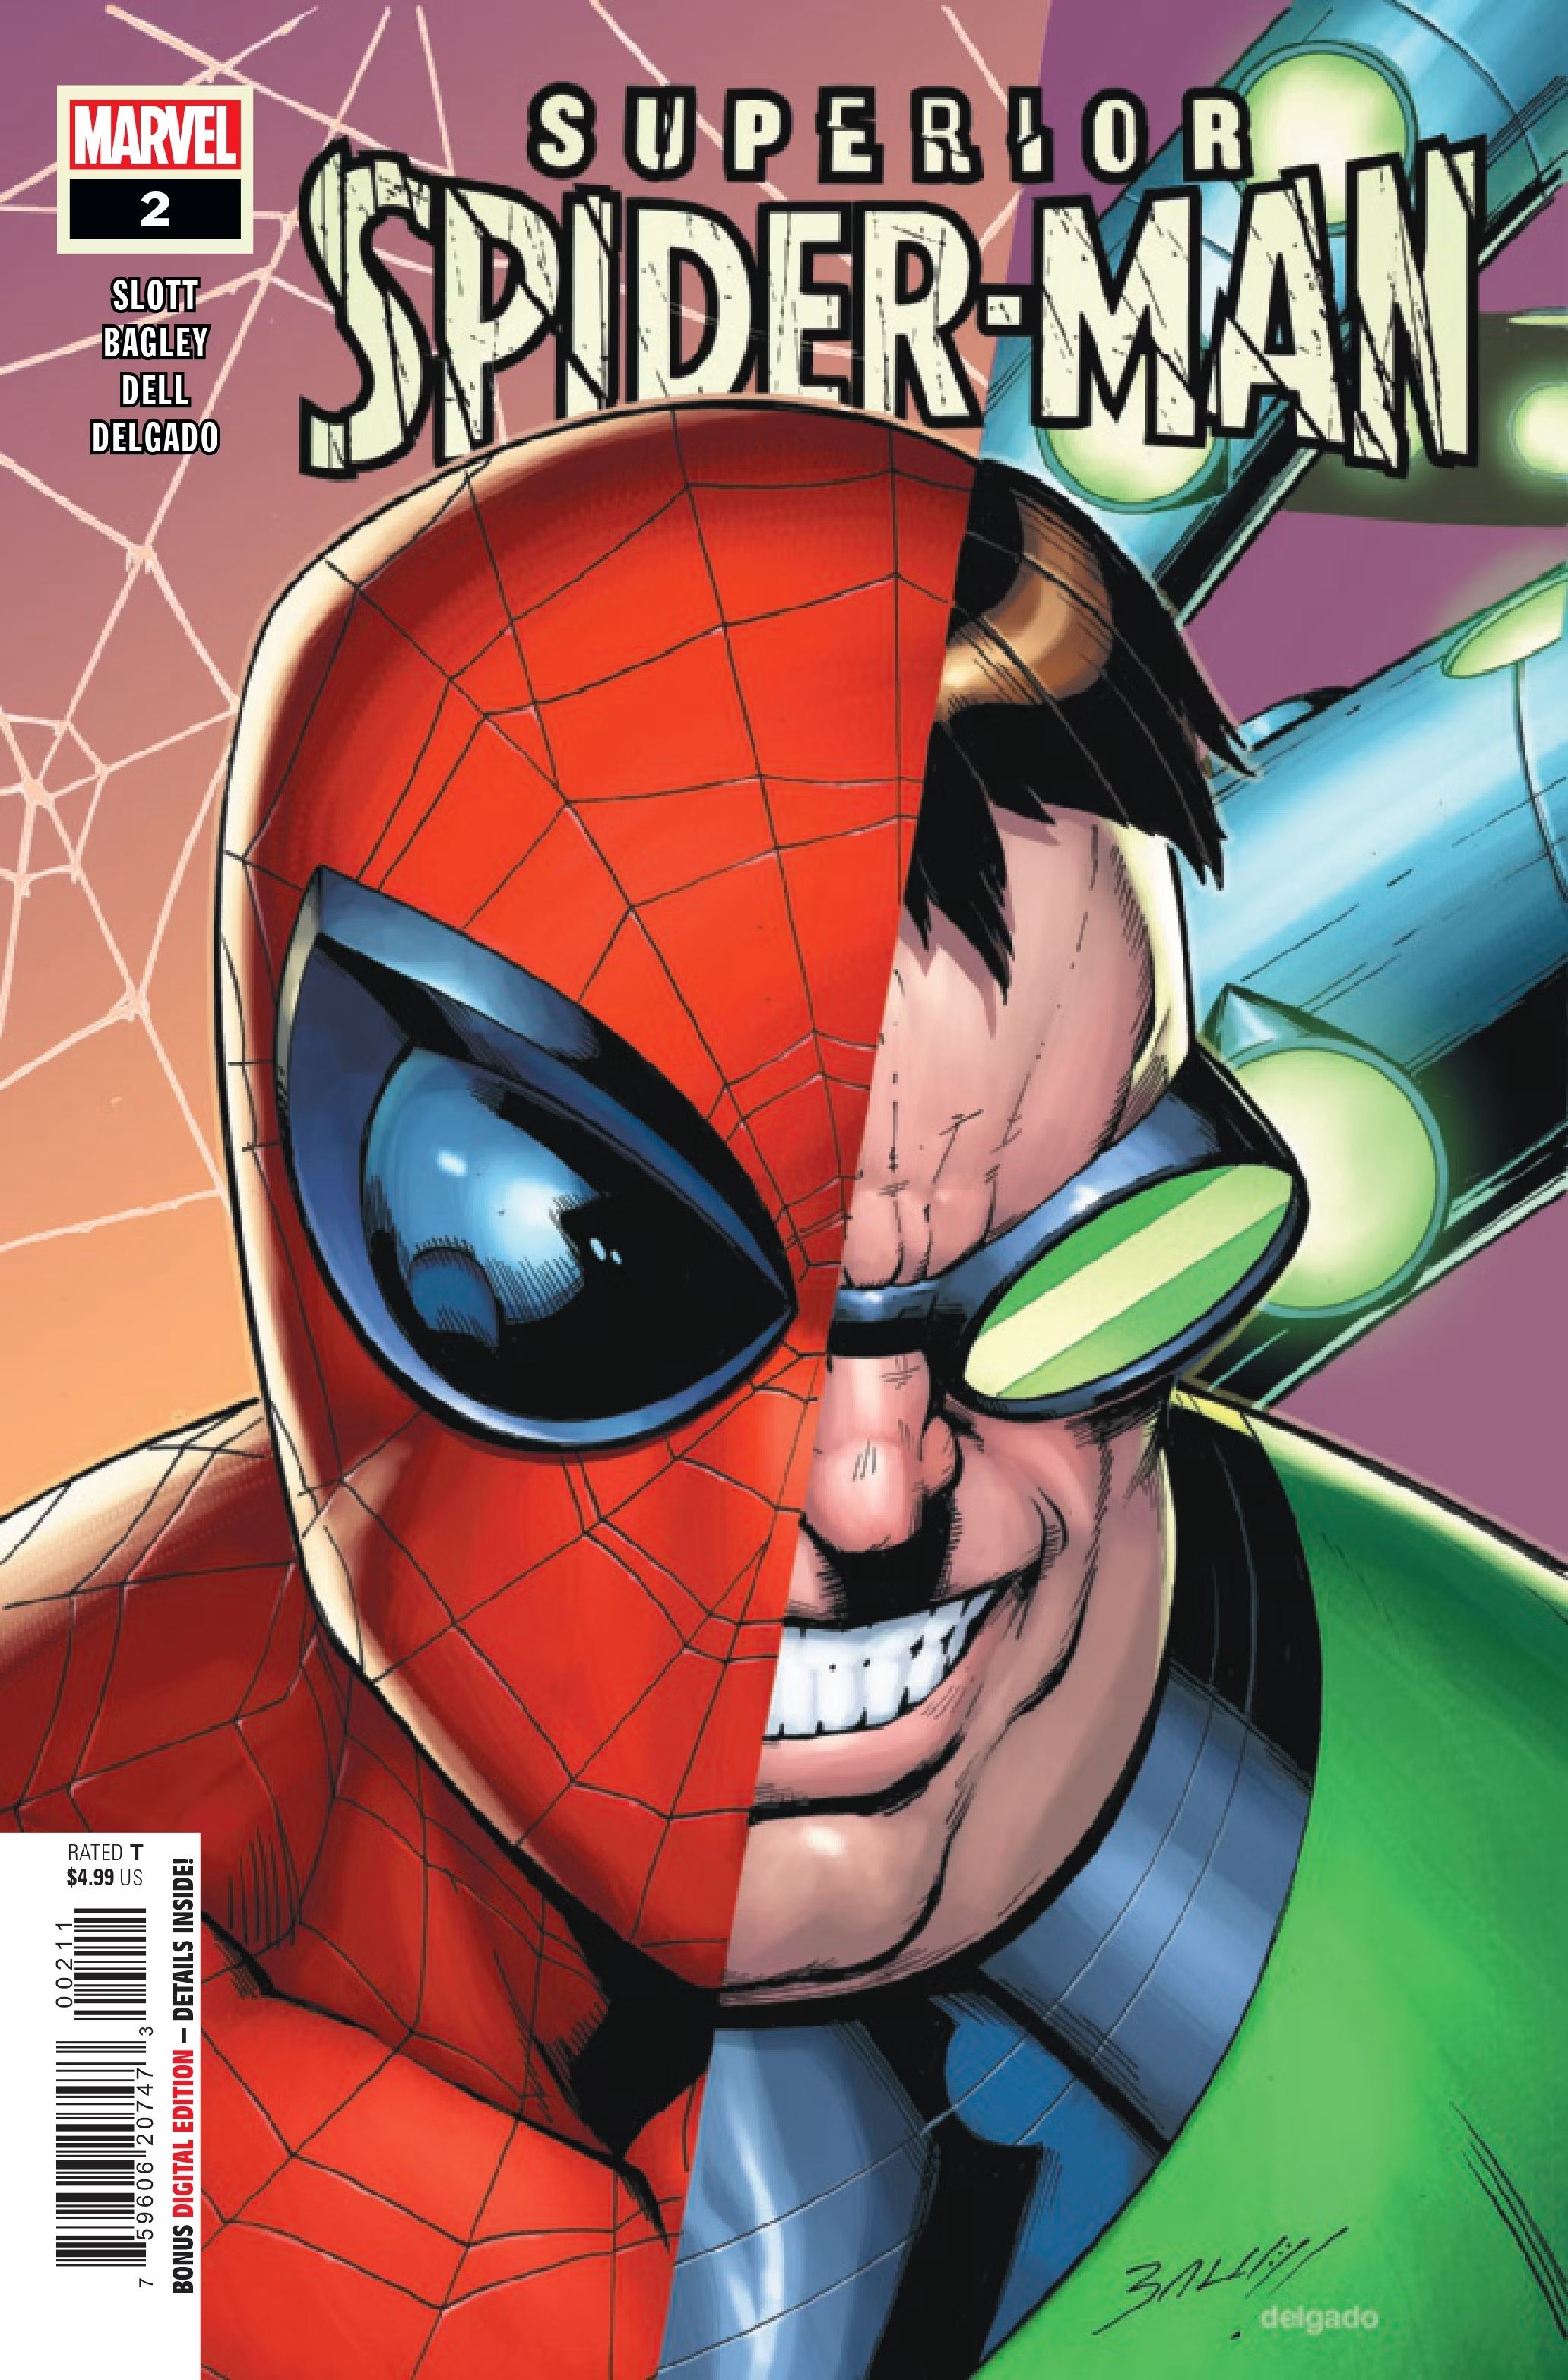 Doctor Octopus and Spider-Man split image on the Superior Spider-Man #2 cover.